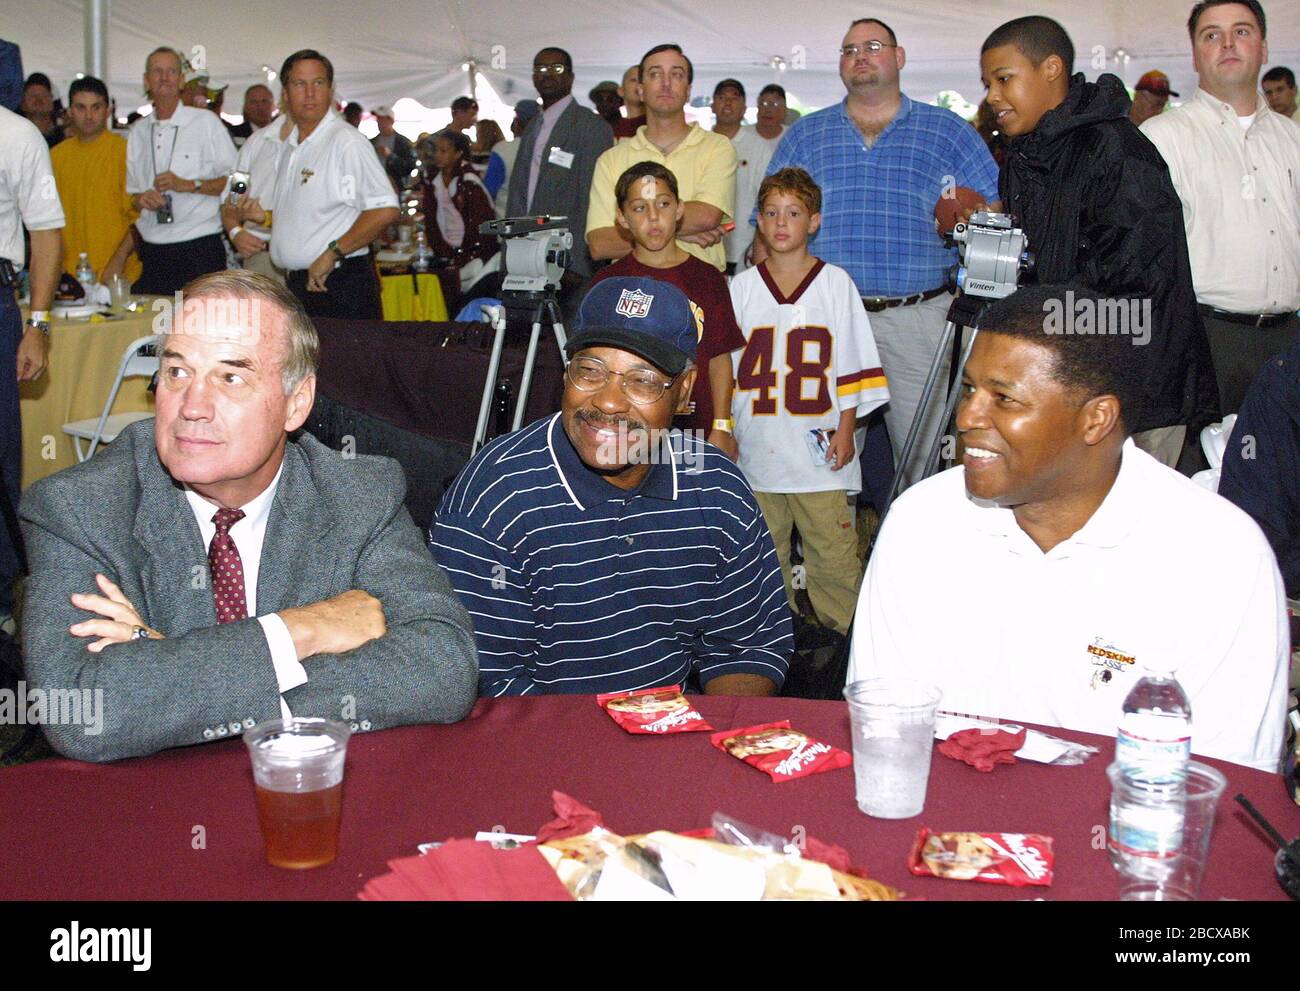 On the eve of the Washington Redskins' final preseason game, the Redskins Alumni Association and the Redskins Development Corporation put on a gala Welcome Home Luncheon at Redskin Park in Ashburn, Virginia on August 28, 2002. More than 500 fans, alumni and supporters attended the picnic style cook out which was held in a huge tent due to needed rain in the drought stricken area. As the rain fell players were honored, signed autographs and a good time was had by all. Redskin Alumni, pictured from left to right: Sam Huff, Hall of Fame linebacker; Bobby Mitchell, Hall of Fame wide receiver; and Stock Photo